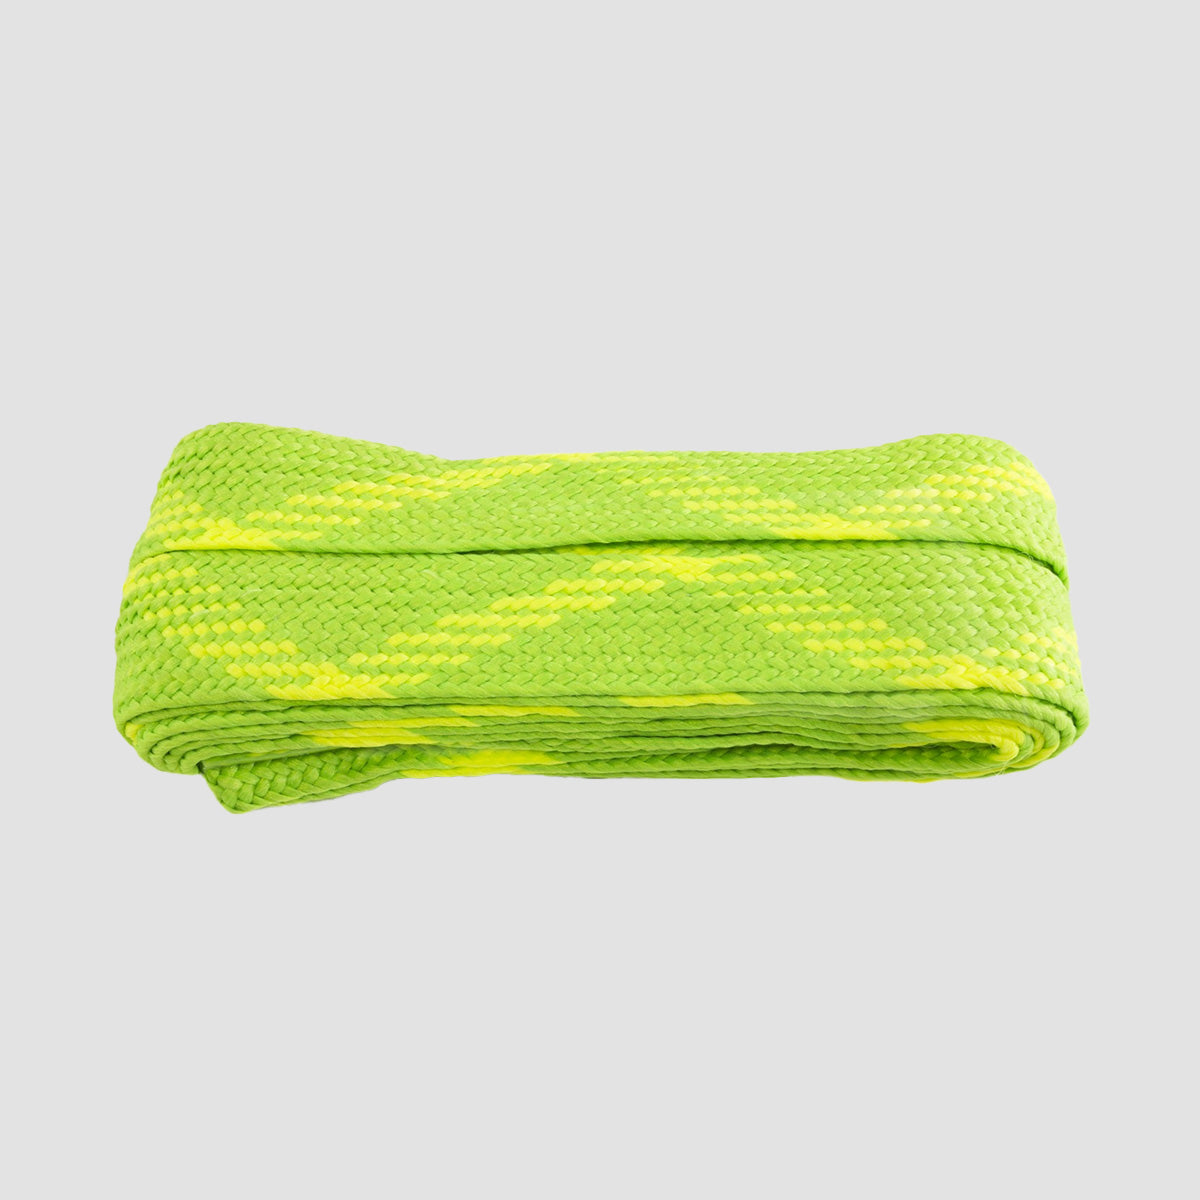 ShoeString Crazy 140cm Fat Flat Laces (Blister Pack) Flo Green/Flo Yellow